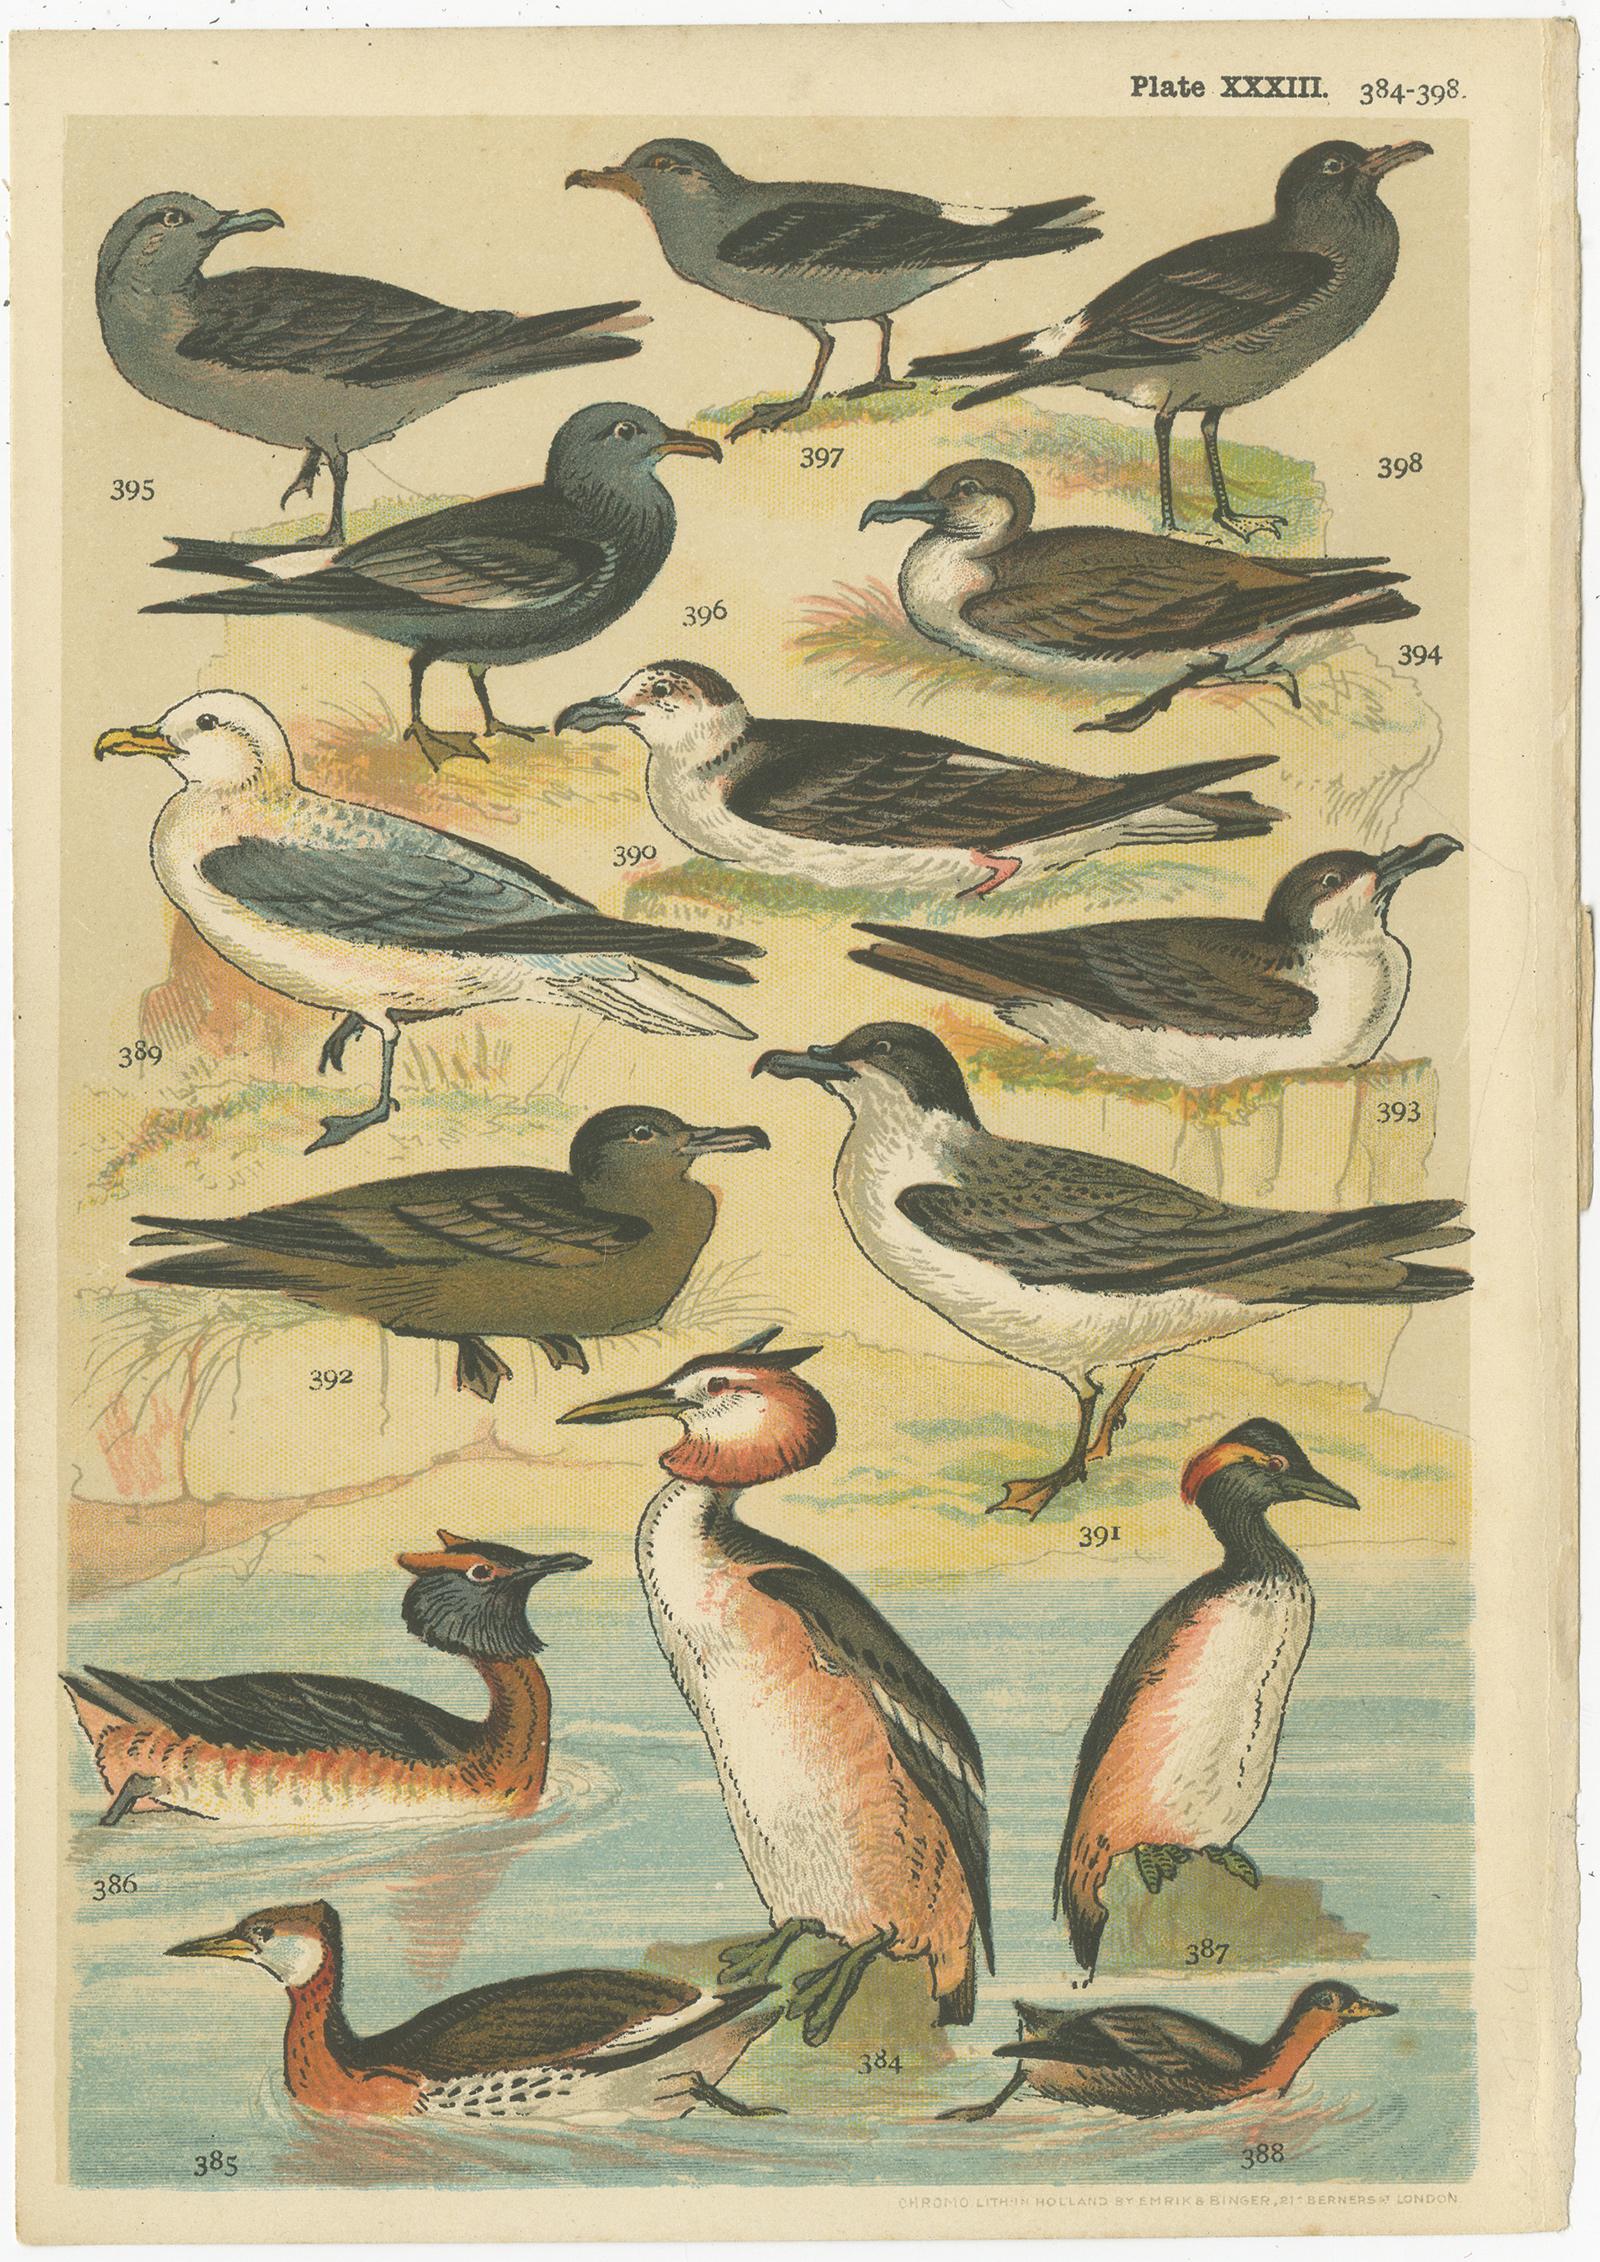 Set of 6 antique prints depicting various waterfowl and wading birds. These prints originate from the series 'Our Country's' by W. J. Gordon, published circa 1900.